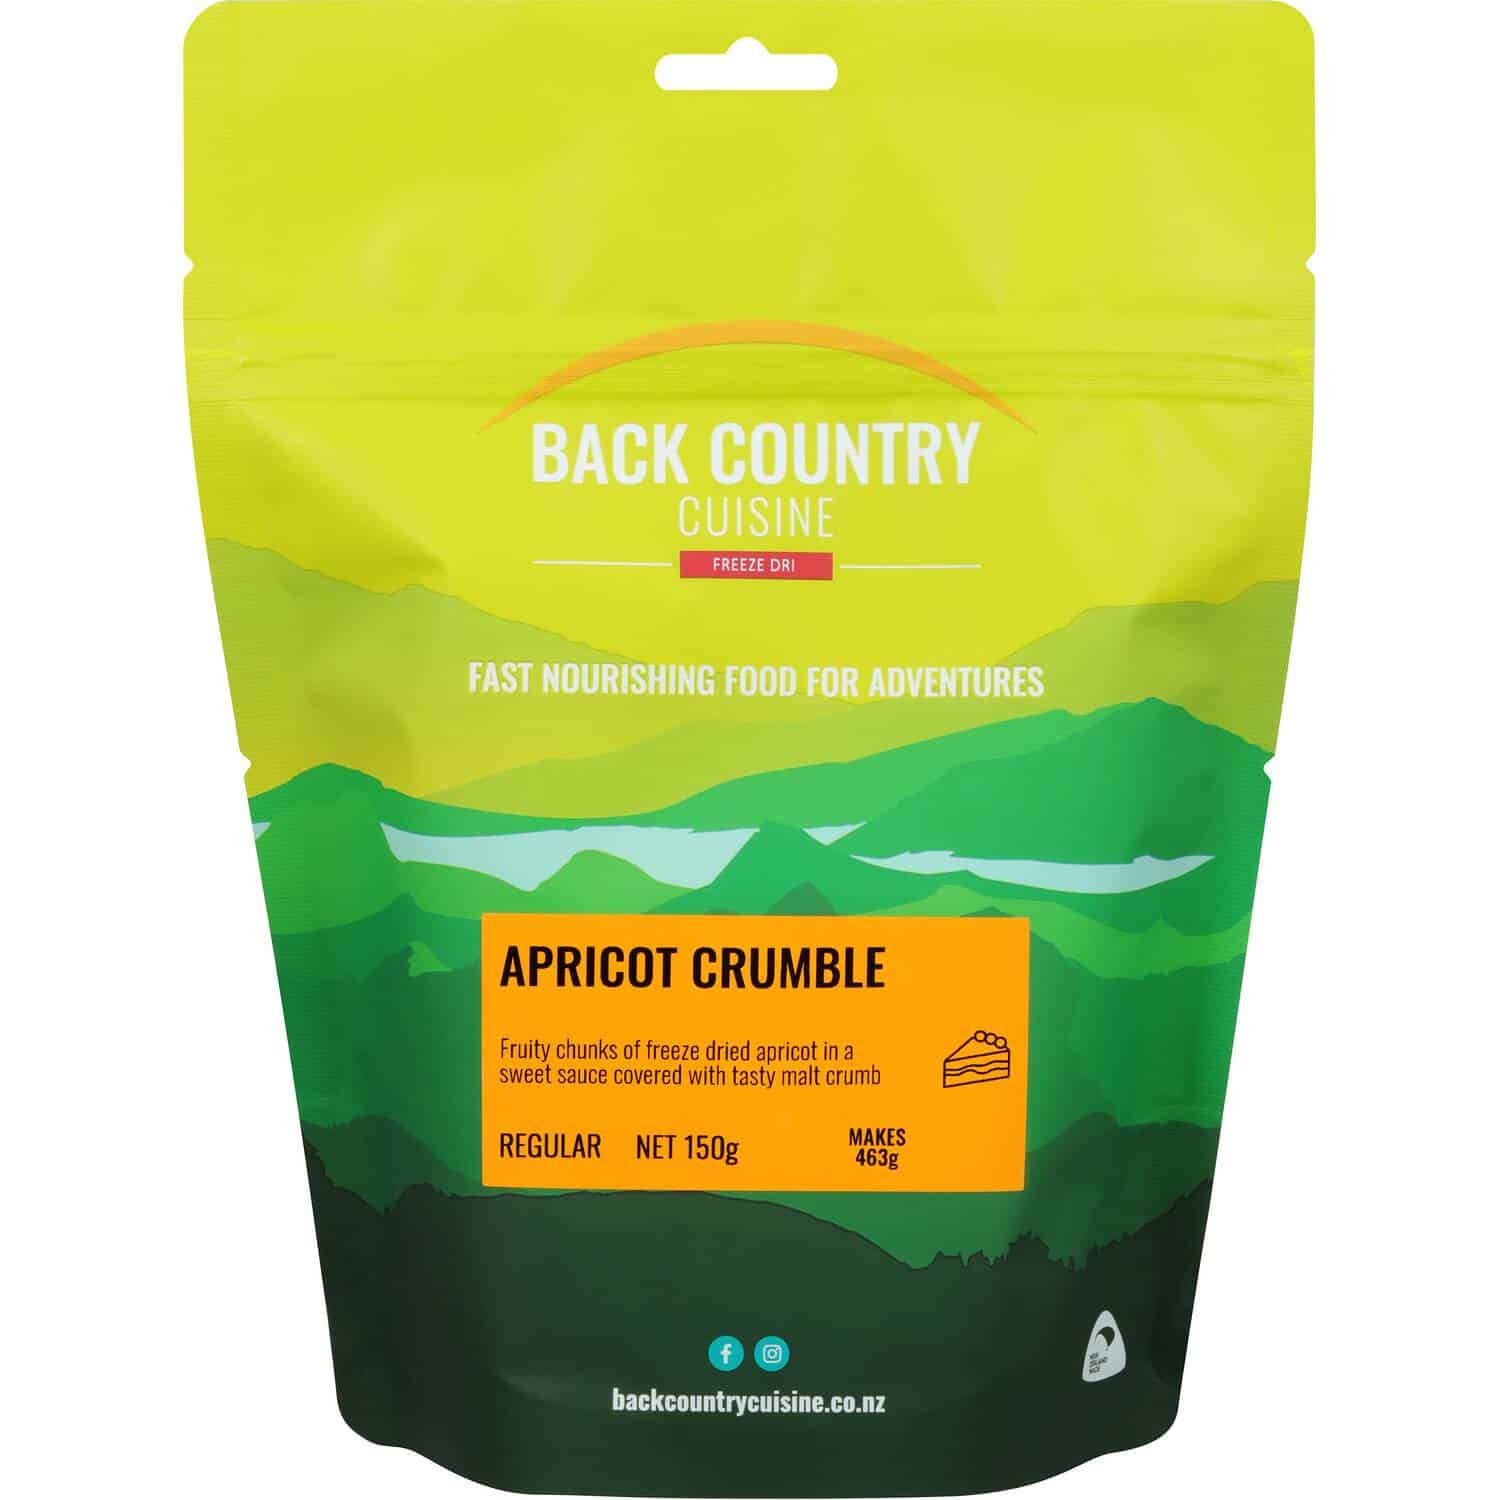 Back Country Cuisine Apricot Crumble Regular - Tramping Food and Accessories sold by Venture Outdoors NZ